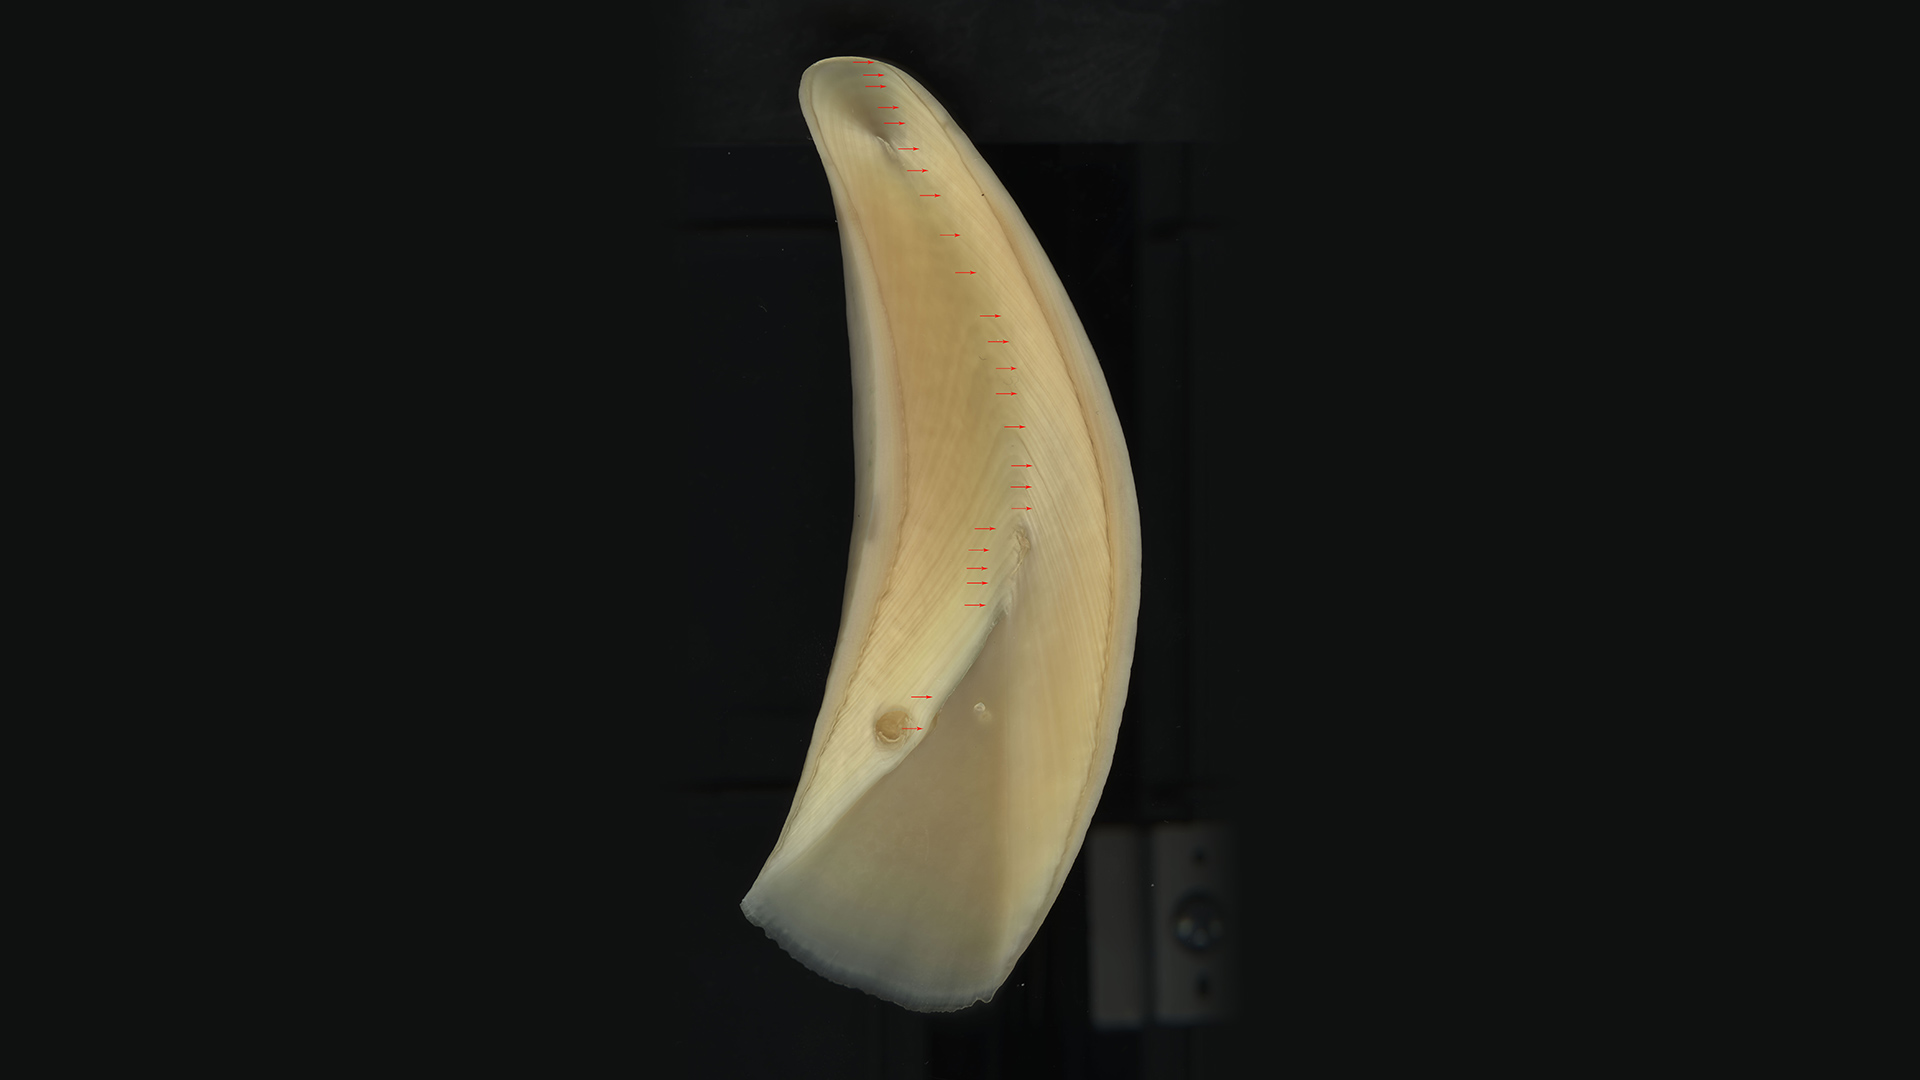 Cross-section of a sperm whale tooth cut lengthwise. There are 25 small red arrows that indicate growth layers.